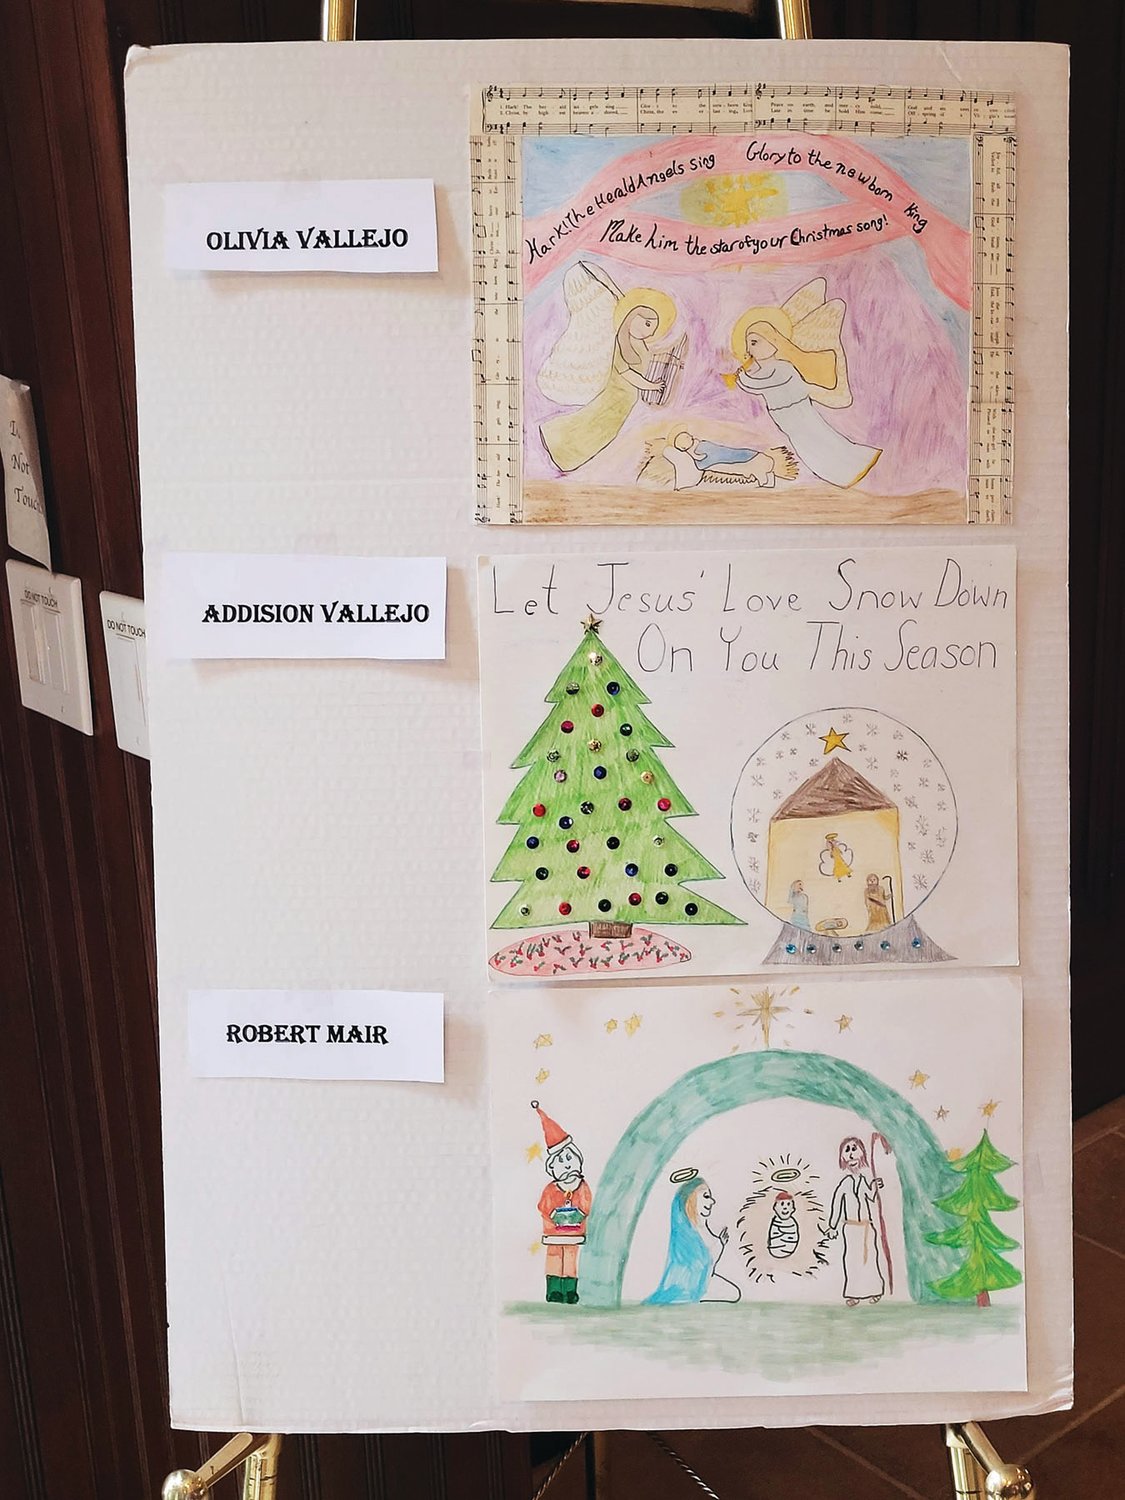 The winning posters in the St. John the Evangelist Knights of Columbus Council 10024 “Keep Christ in Christmas” poster contest.